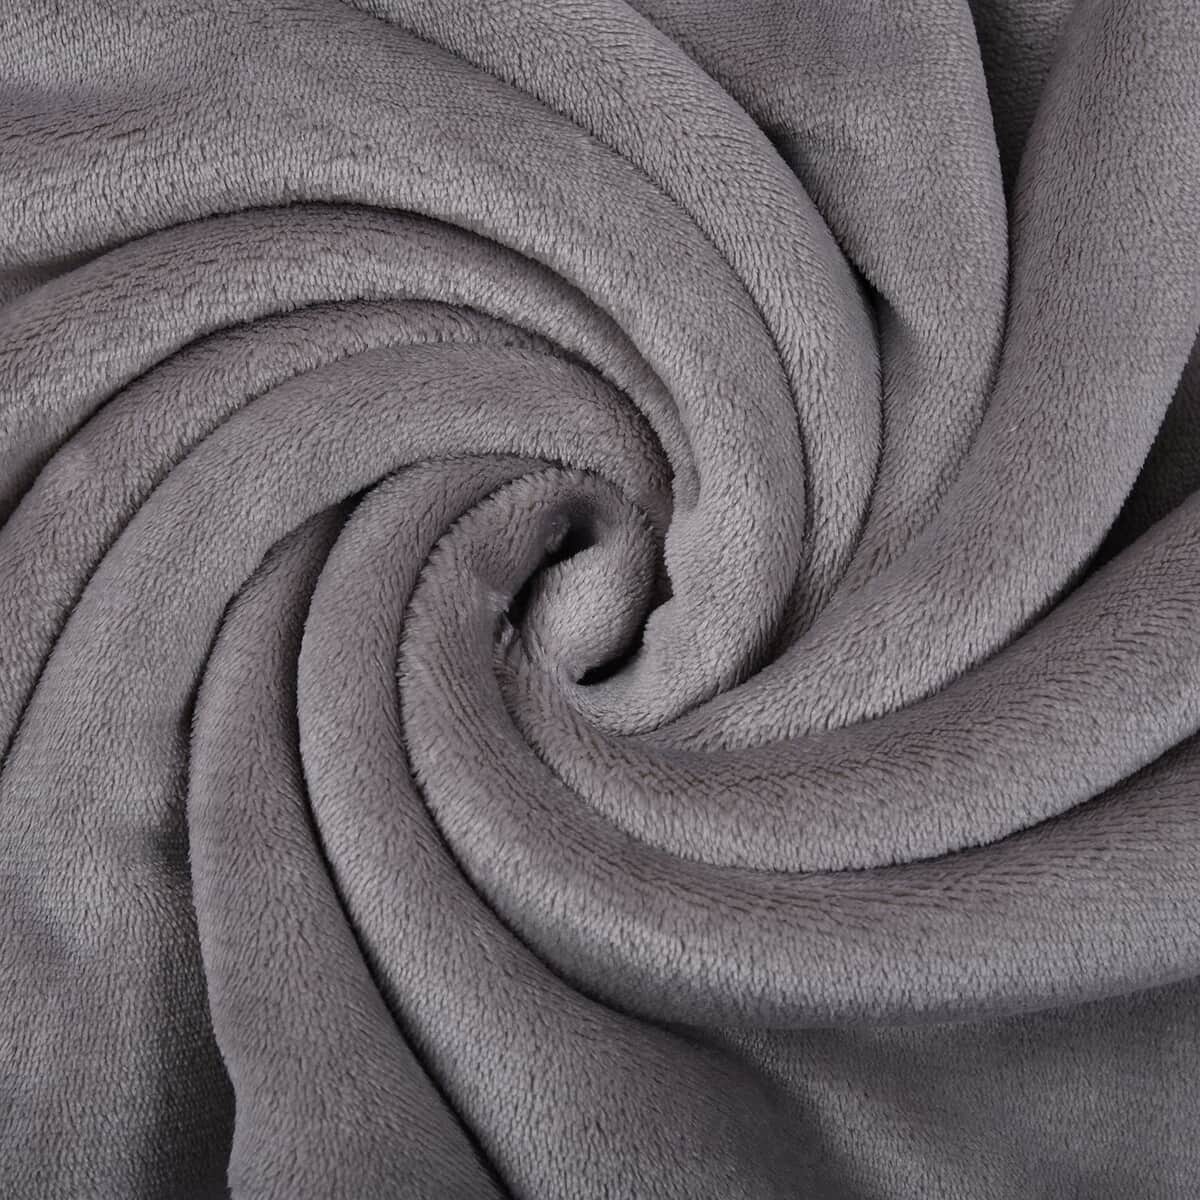 HOMESMART Light Gray Microfiber Flannel with Sherpa Blanket image number 5